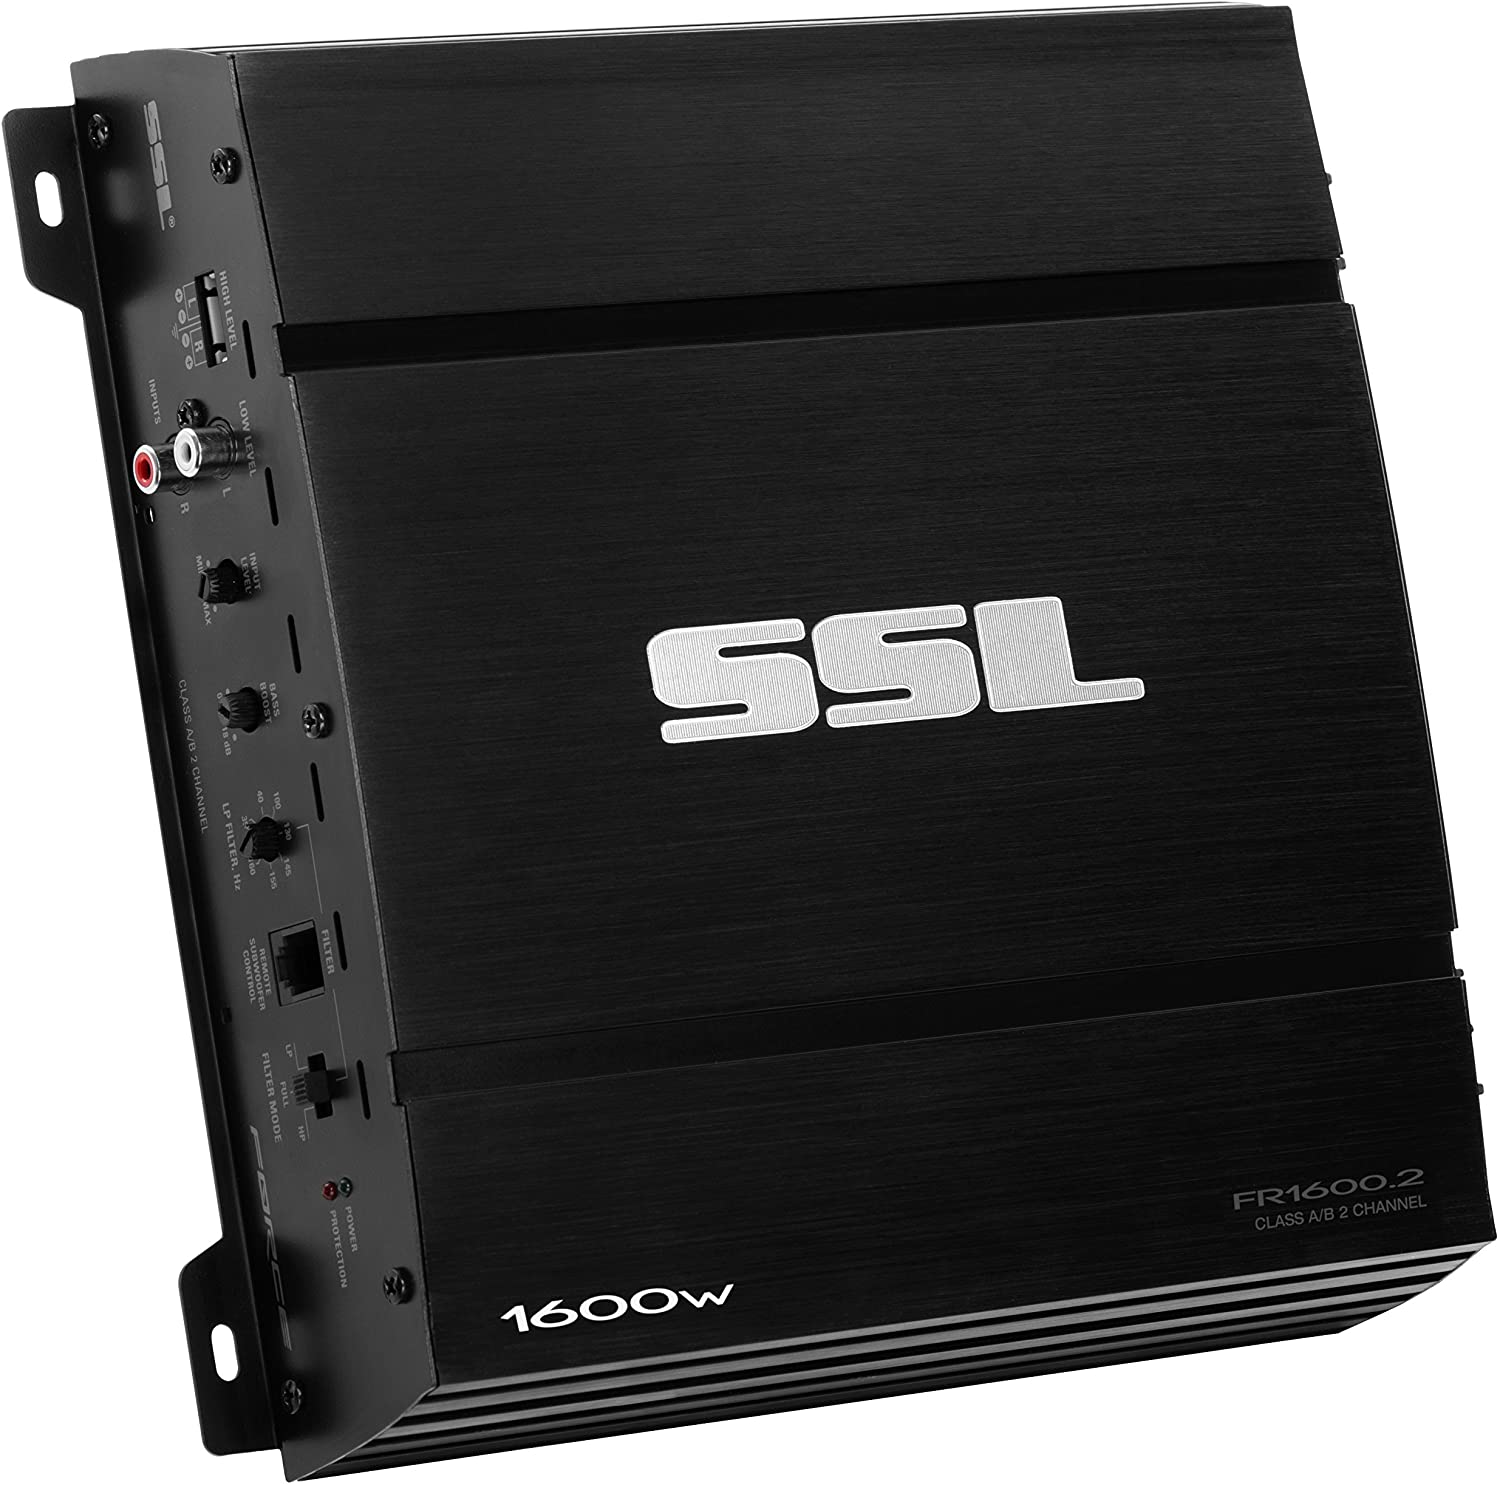 Sound Storm Labs FR1600.2 Force 1600 Watt 2 Channel 2 to 8 Ohm Stable Class A B Full Range Bridgeable Mosfet Car Amplifier with Remote Subwoofer Control (1600 Watt 2-Channel)